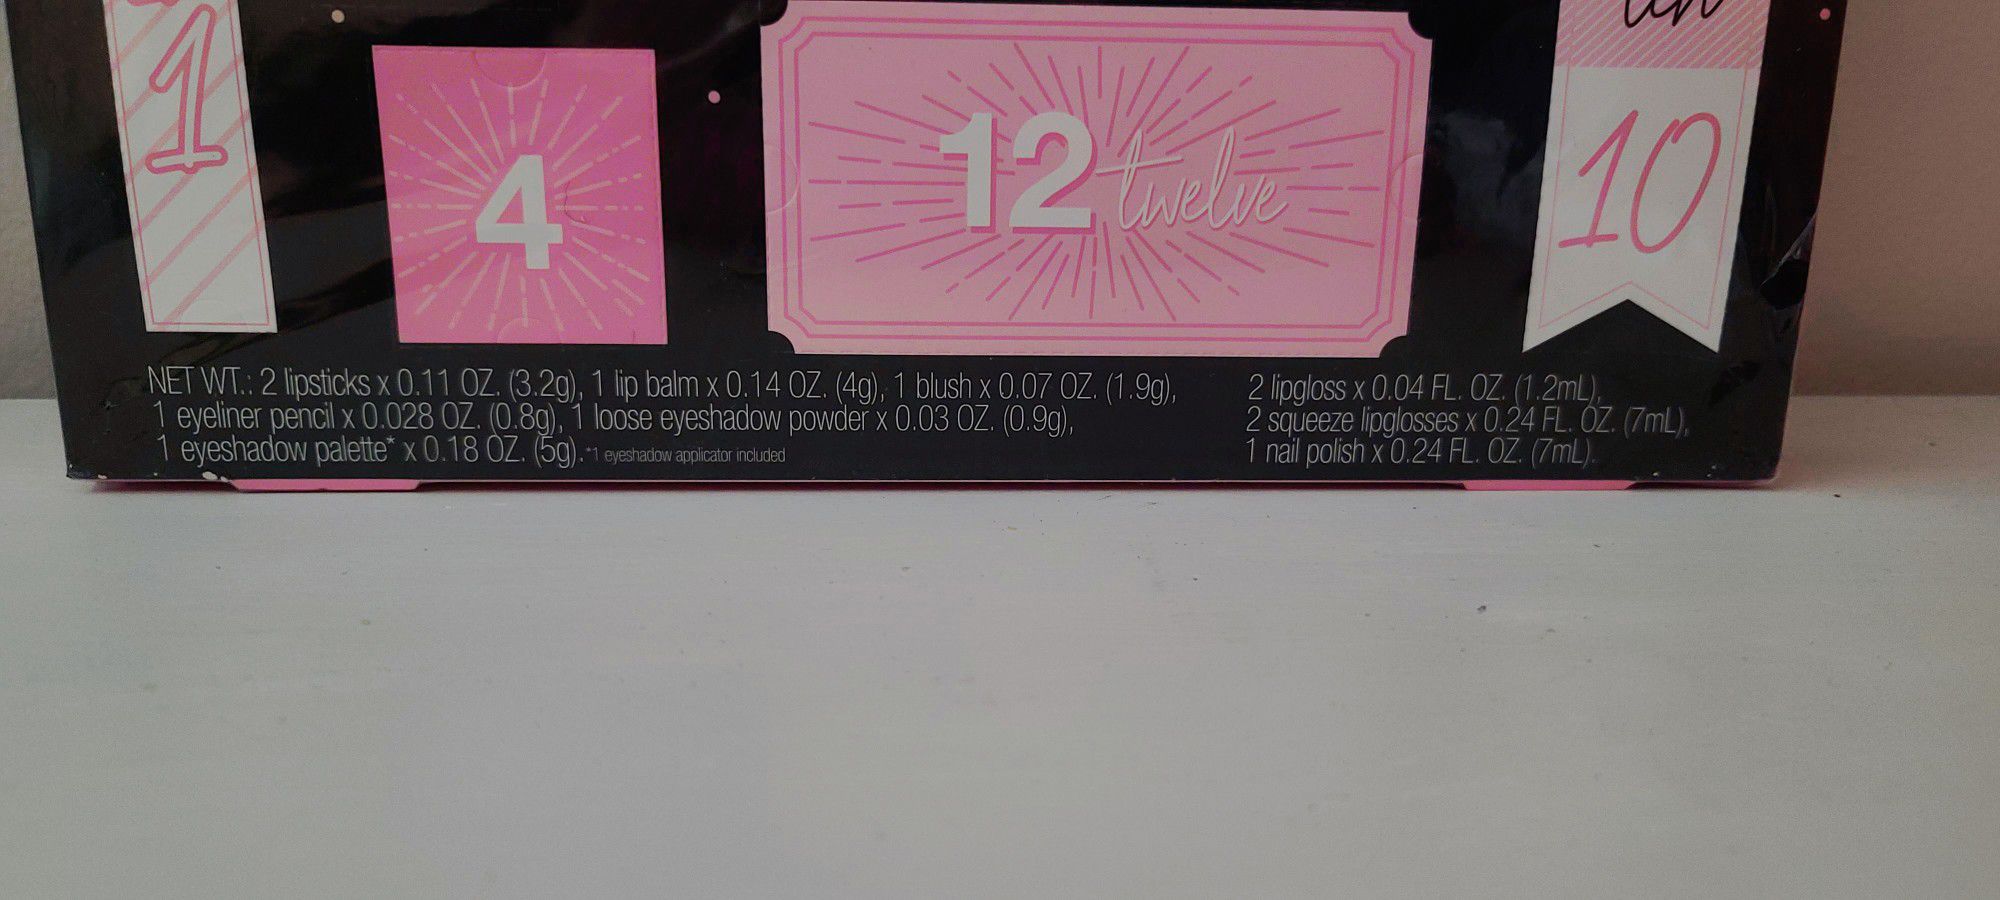 12 Days Of Christmas Make Up Advent Calender Brand New